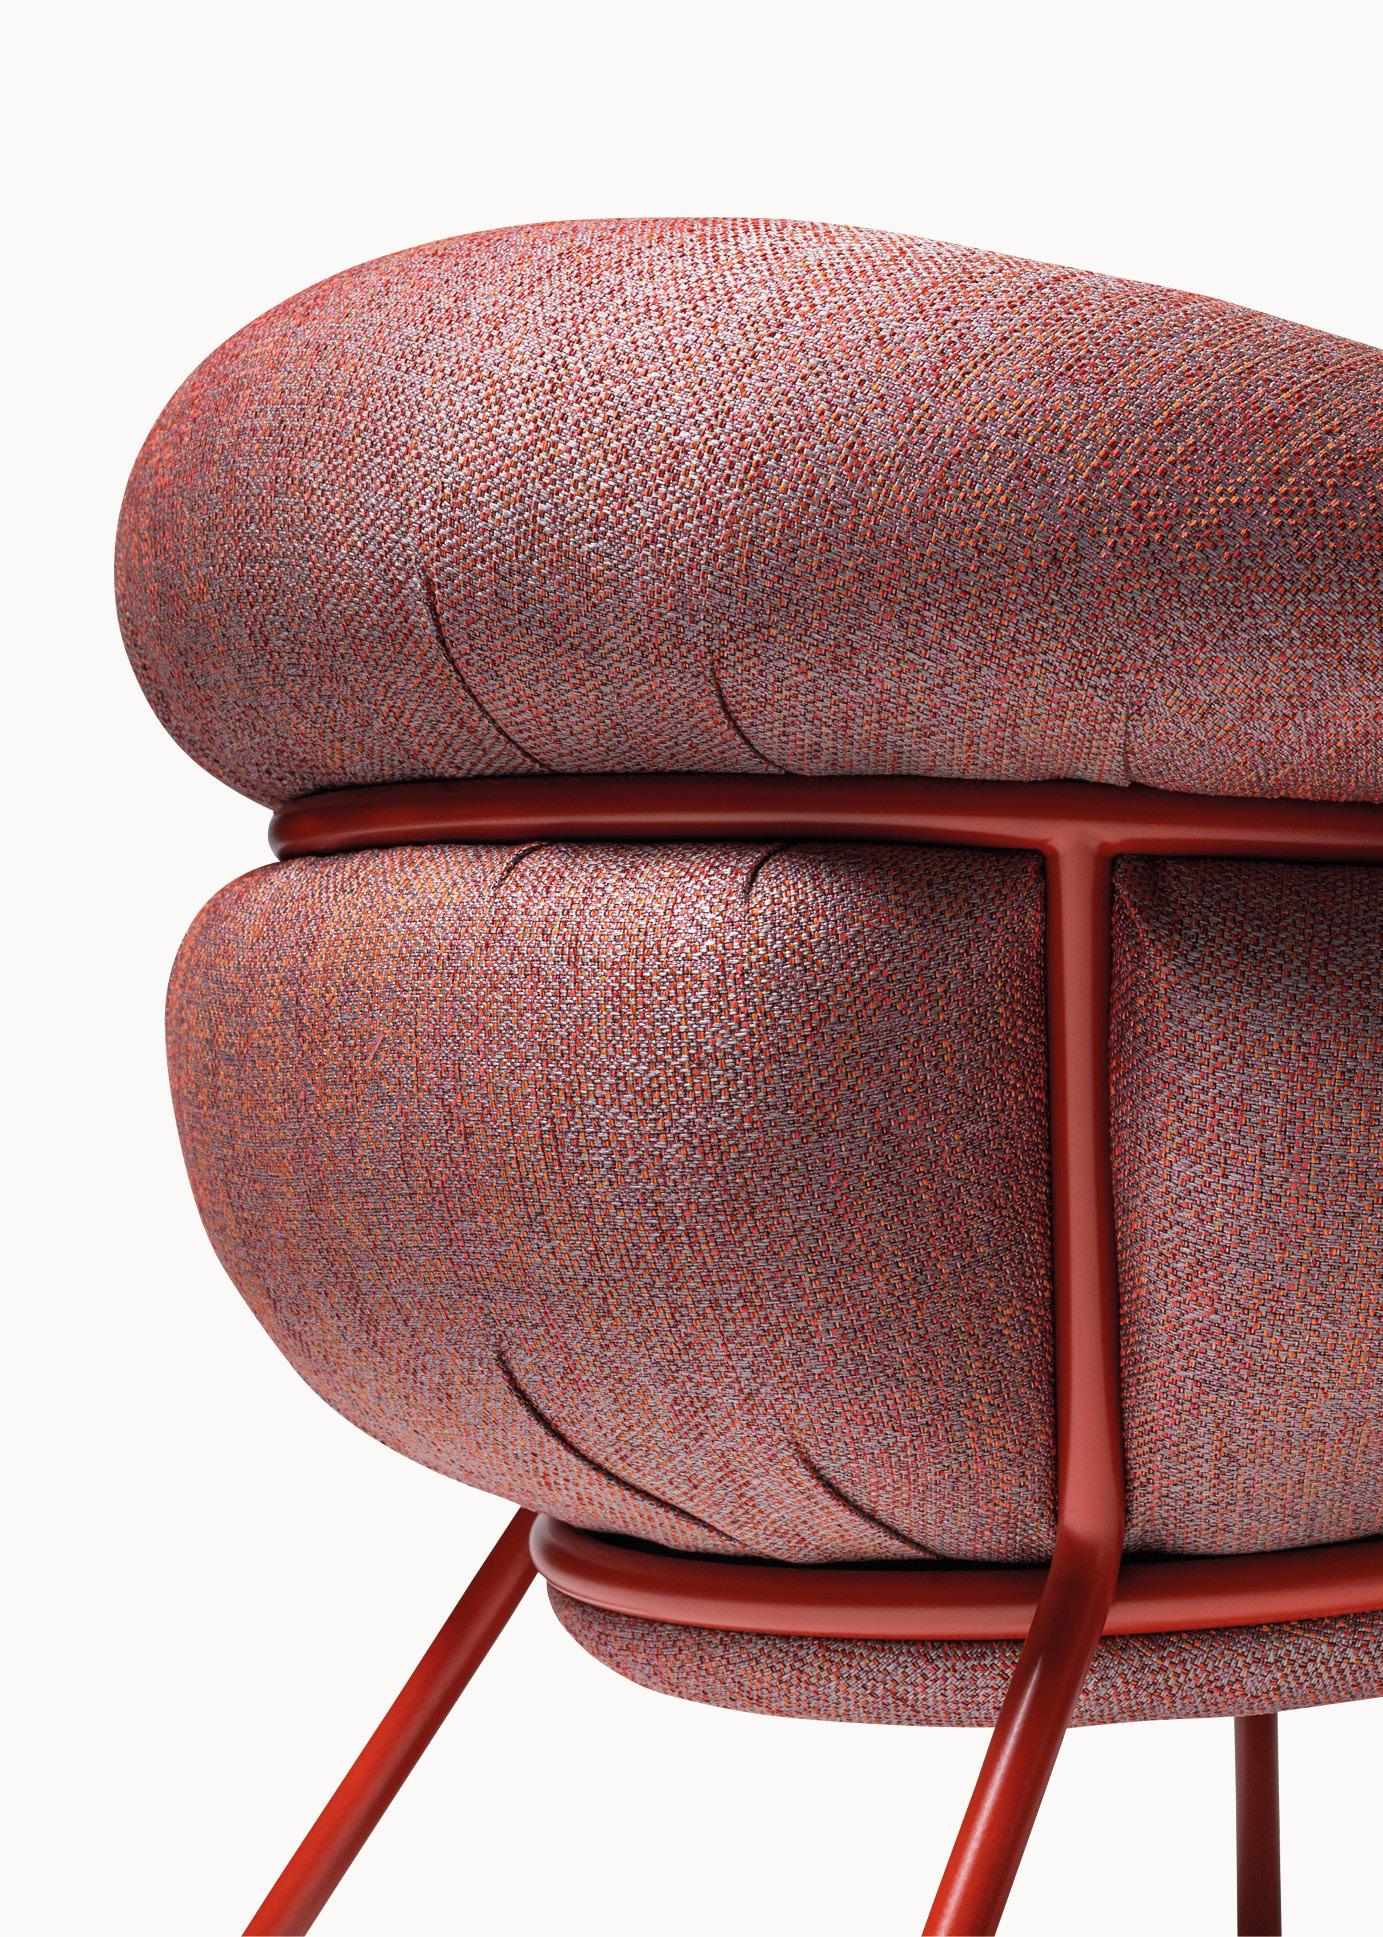 Modern Grasso Armchair by Stephen Burks padded red upholstery with a red metal structur For Sale